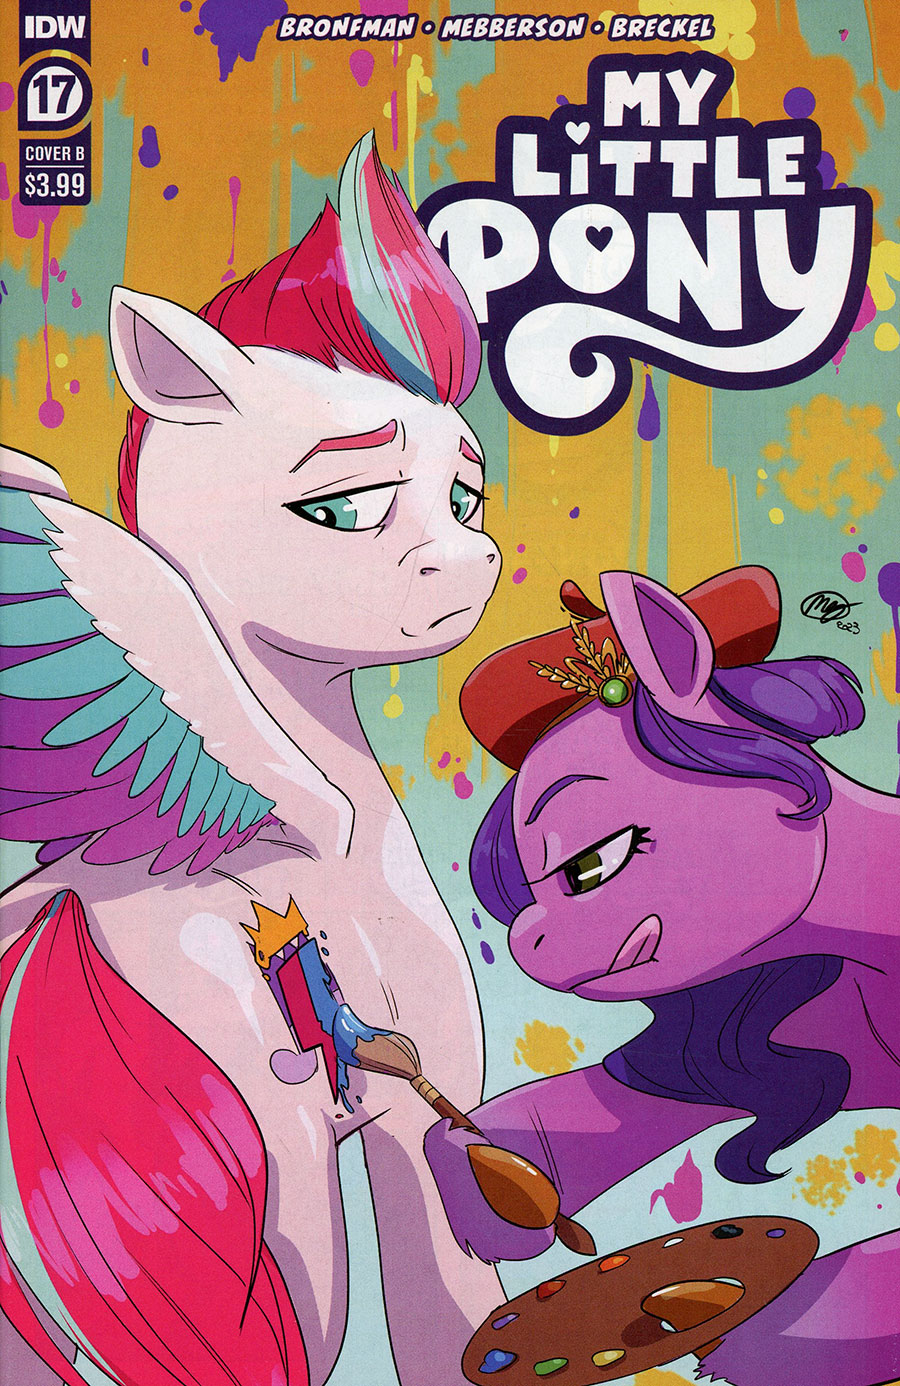 My Little Pony #17 Cover B Variant Megan Huang Cover